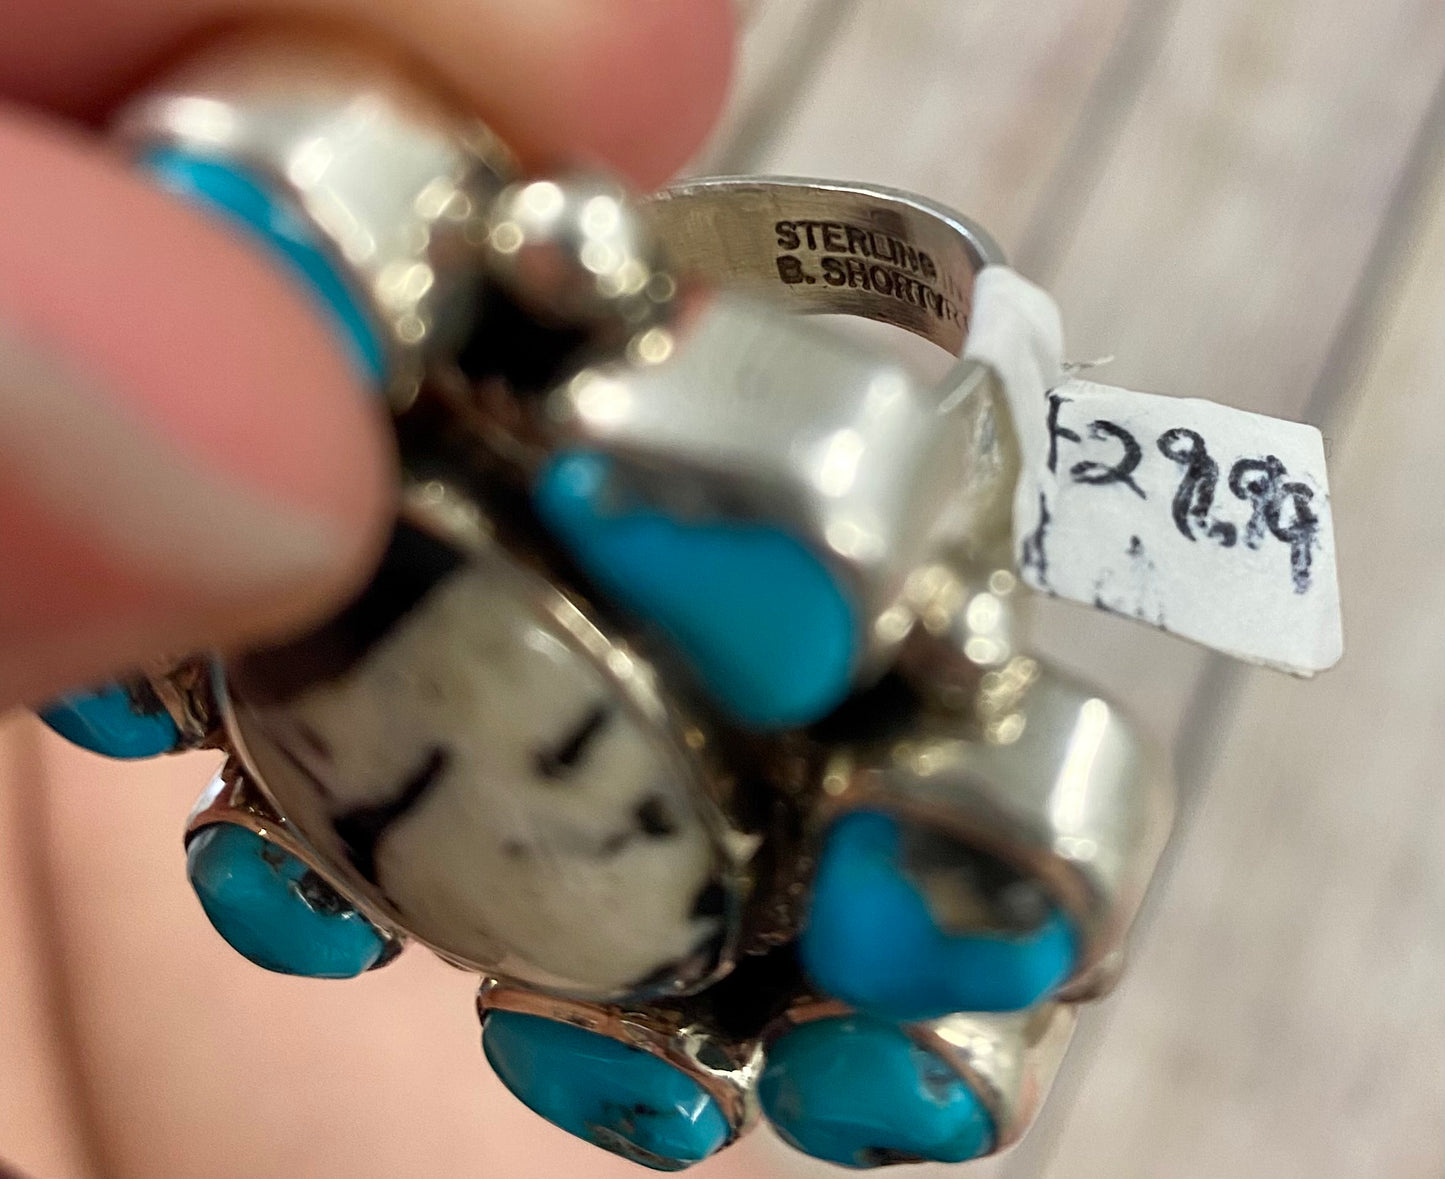 The Turquoise & White Buffalo Ring (Adjustable) Signed By B. Shorty